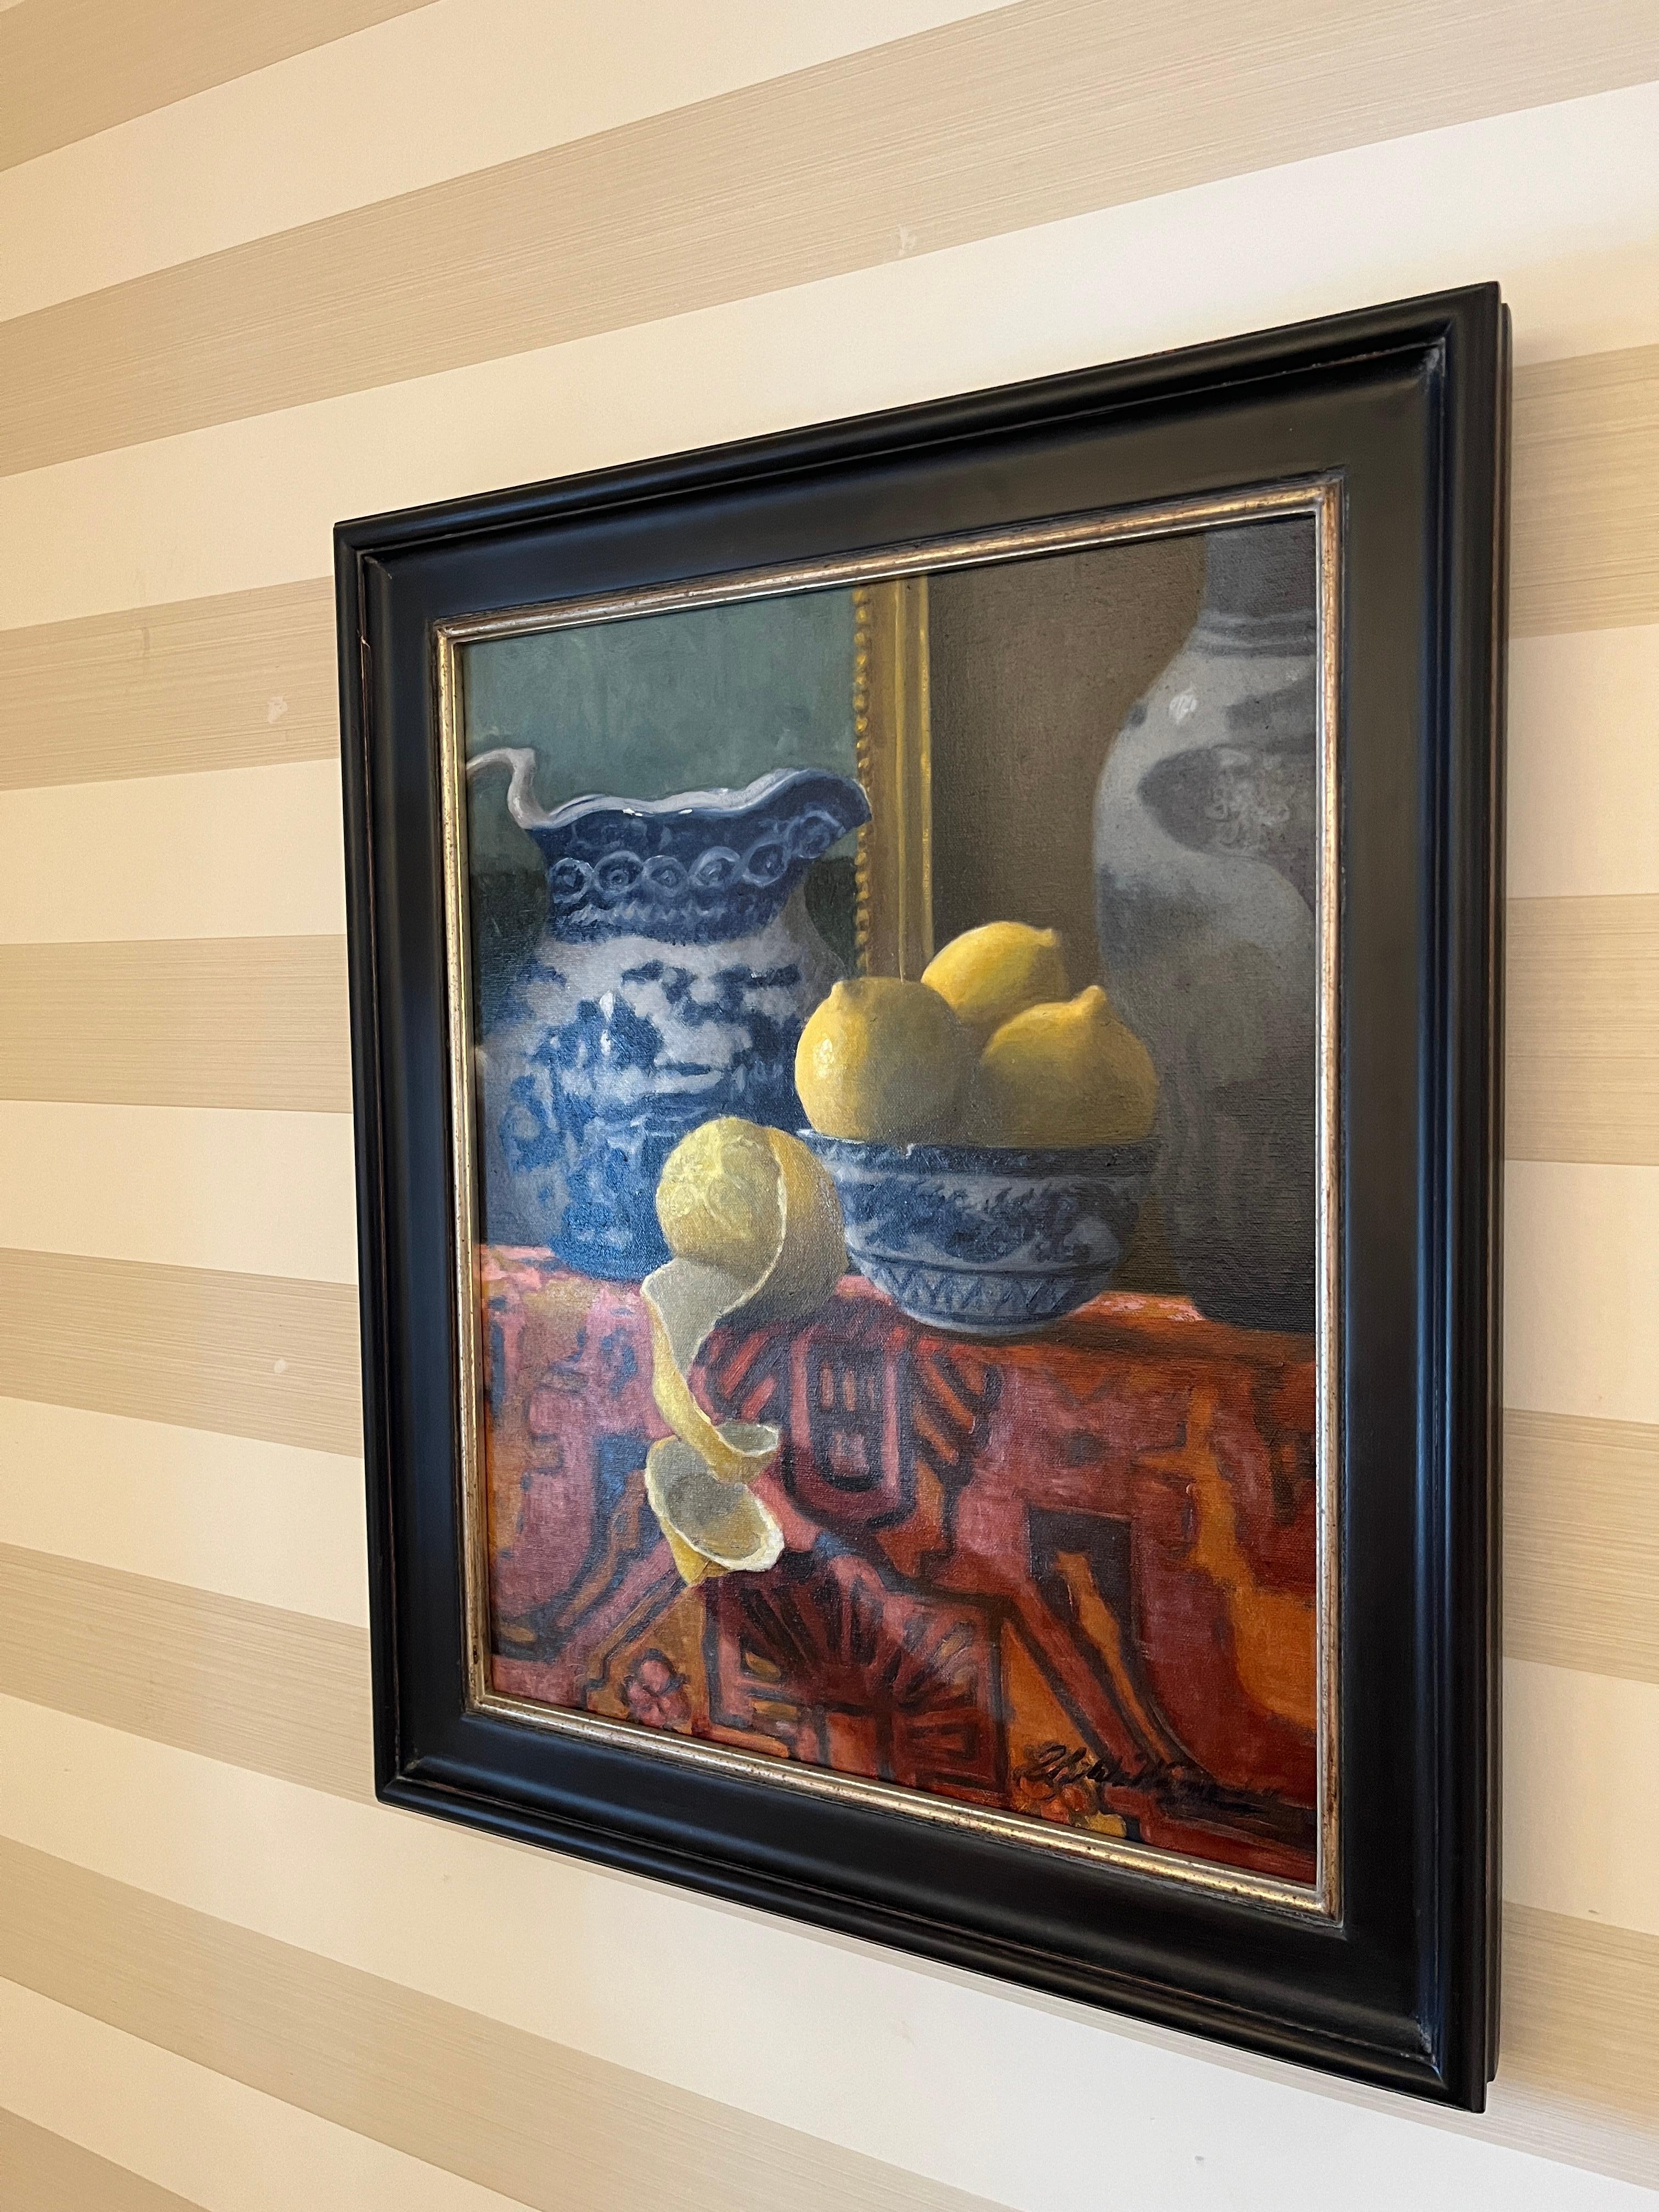 This is an original oil painting on by Ginny Williams. Celebrating the elements of still life often found in paintings of the Dutch golden age, this piece showcases blue and white porcelain, a Turkish rug, and lemons.

Williams has a degree in art